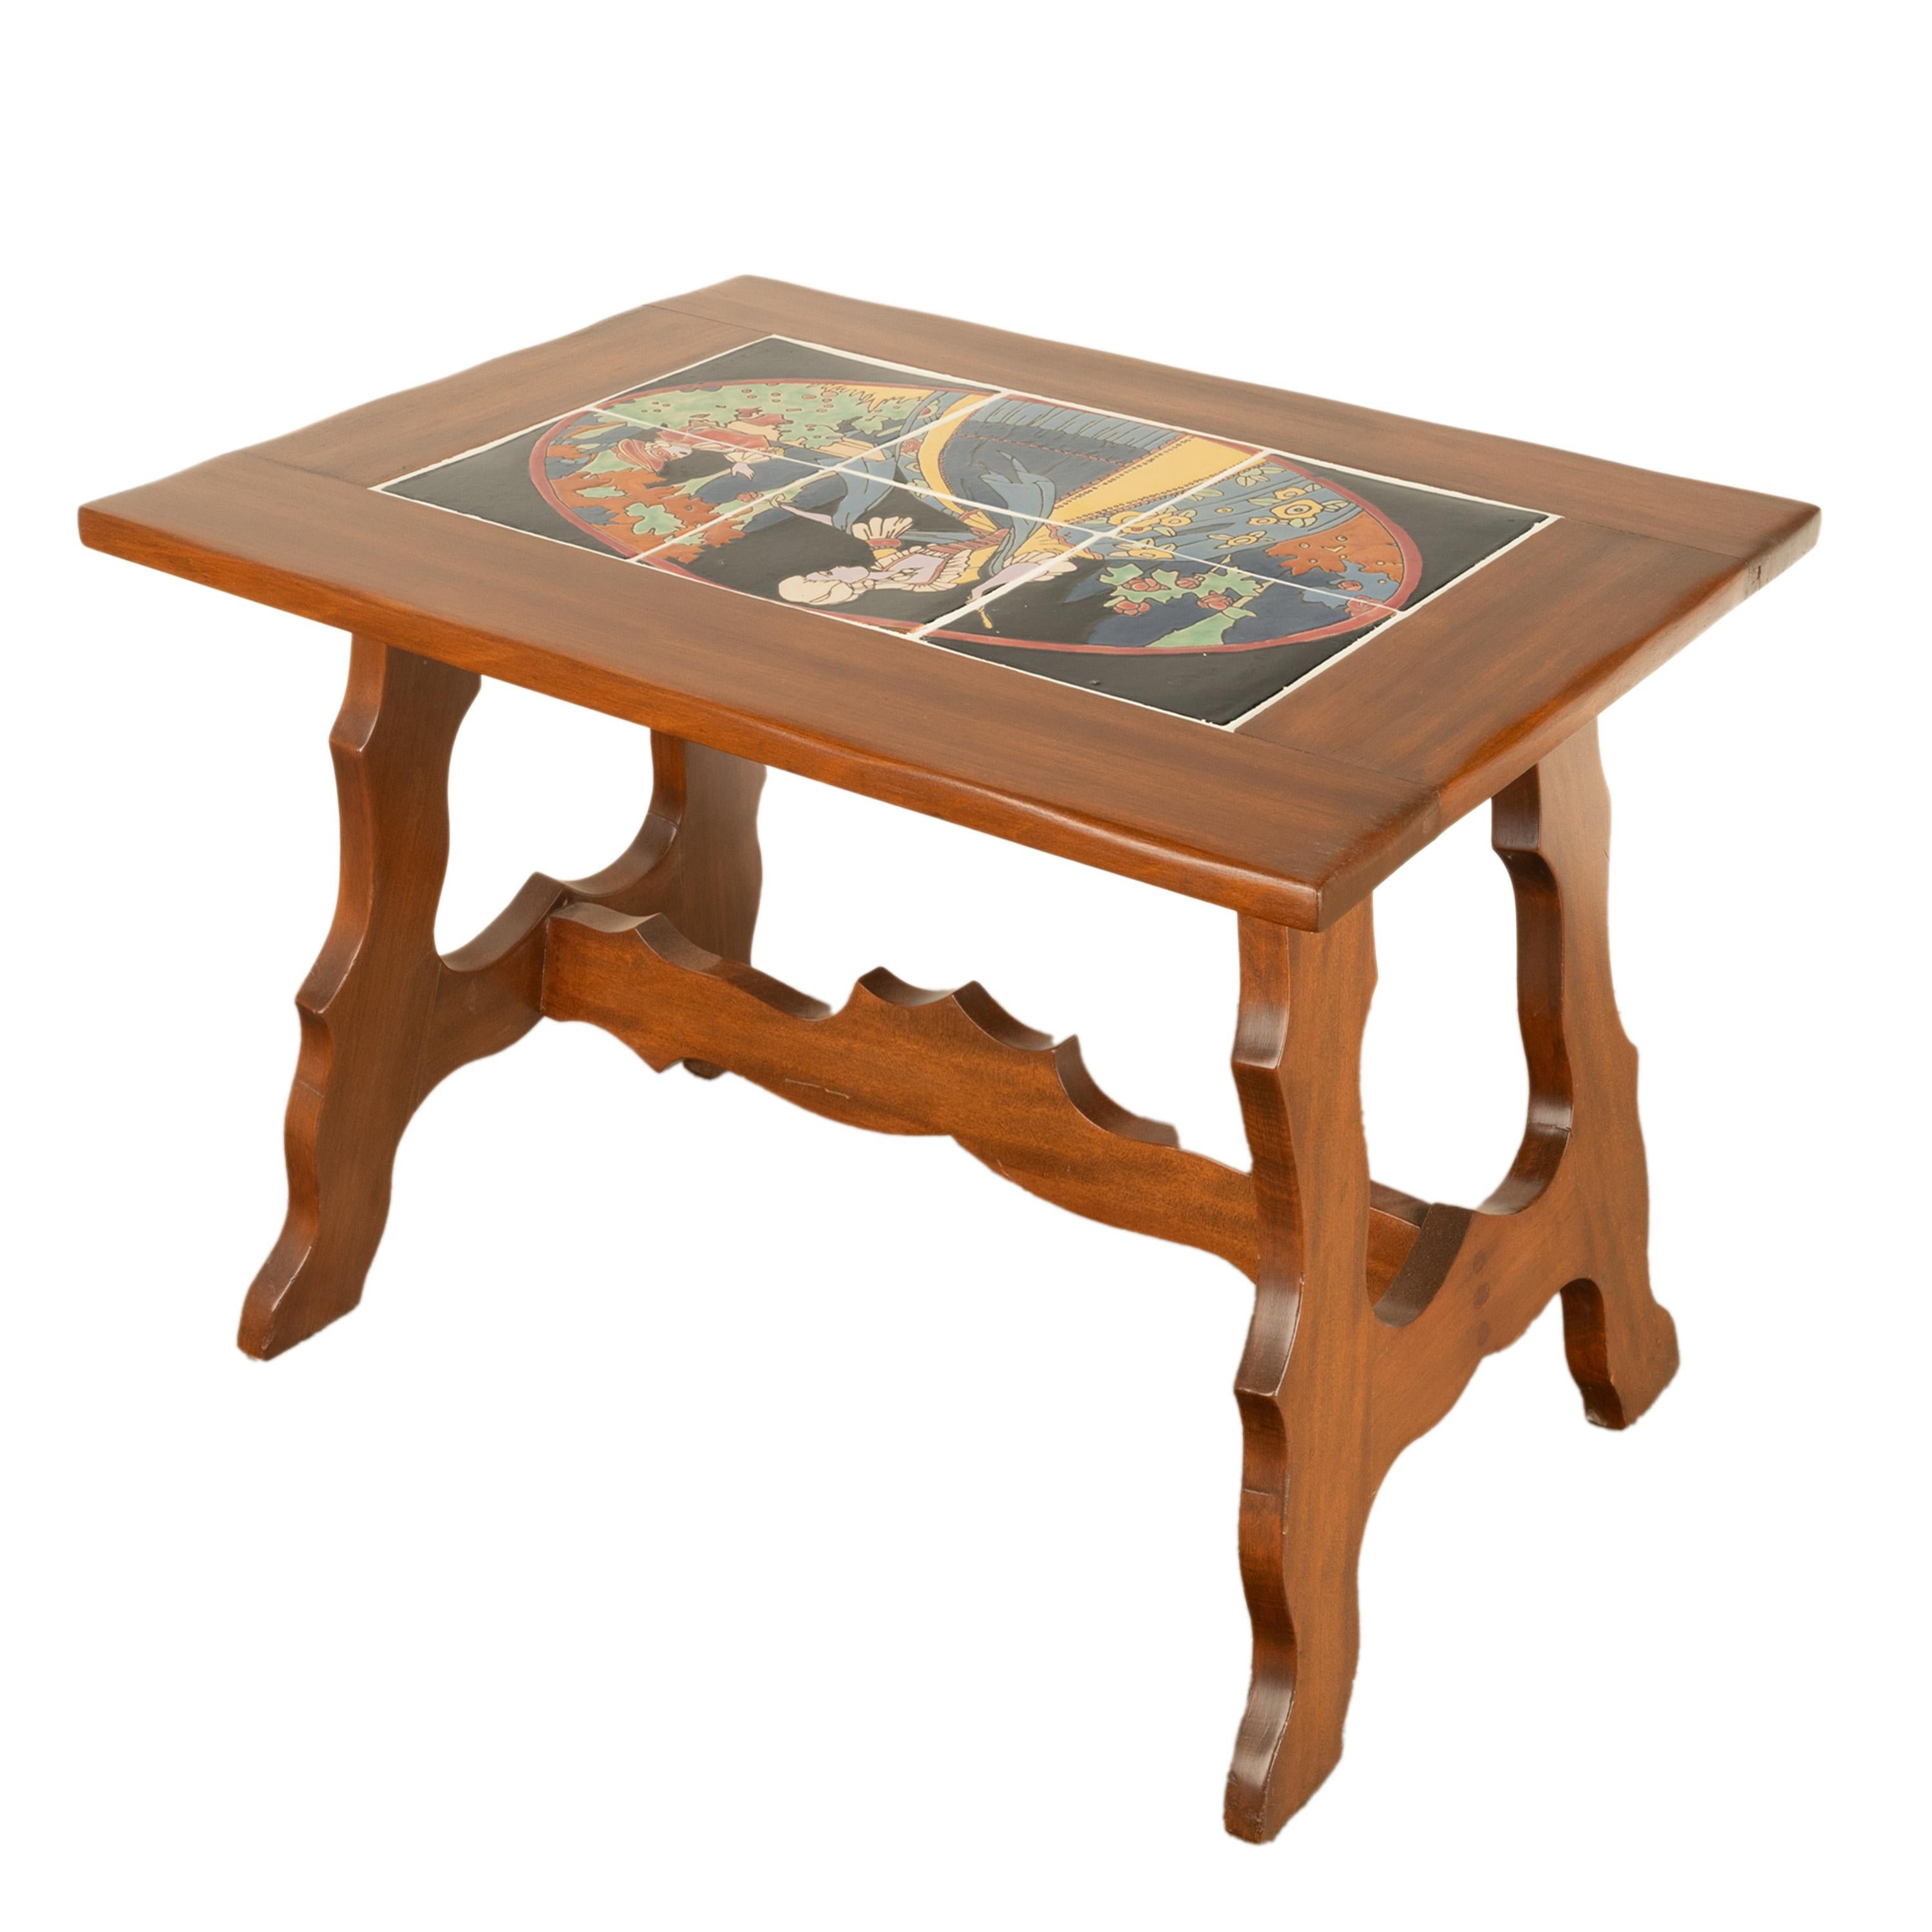 Glazed Antique Mission Catalina Monterrey California Tile Top Walnut Coffee Table 1930 For Sale